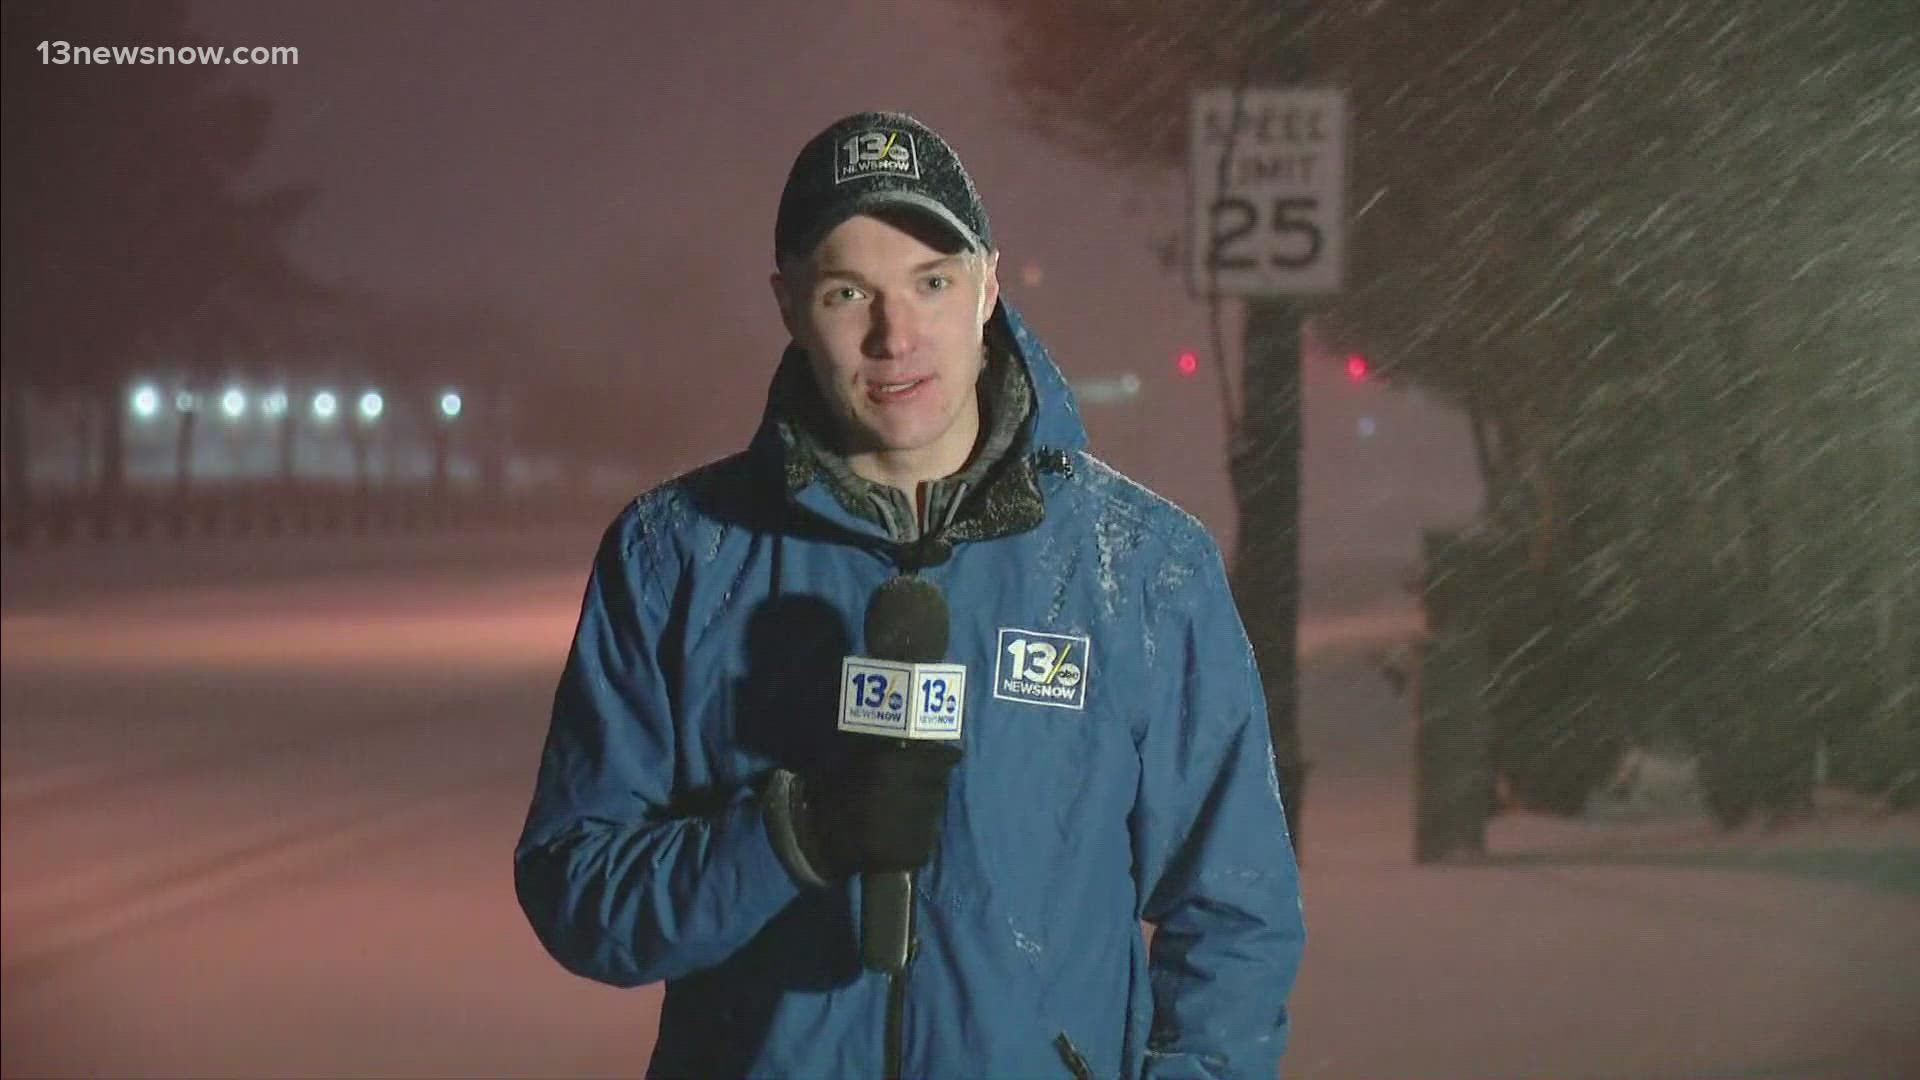 It's a second round of snow for Hampton Roads!